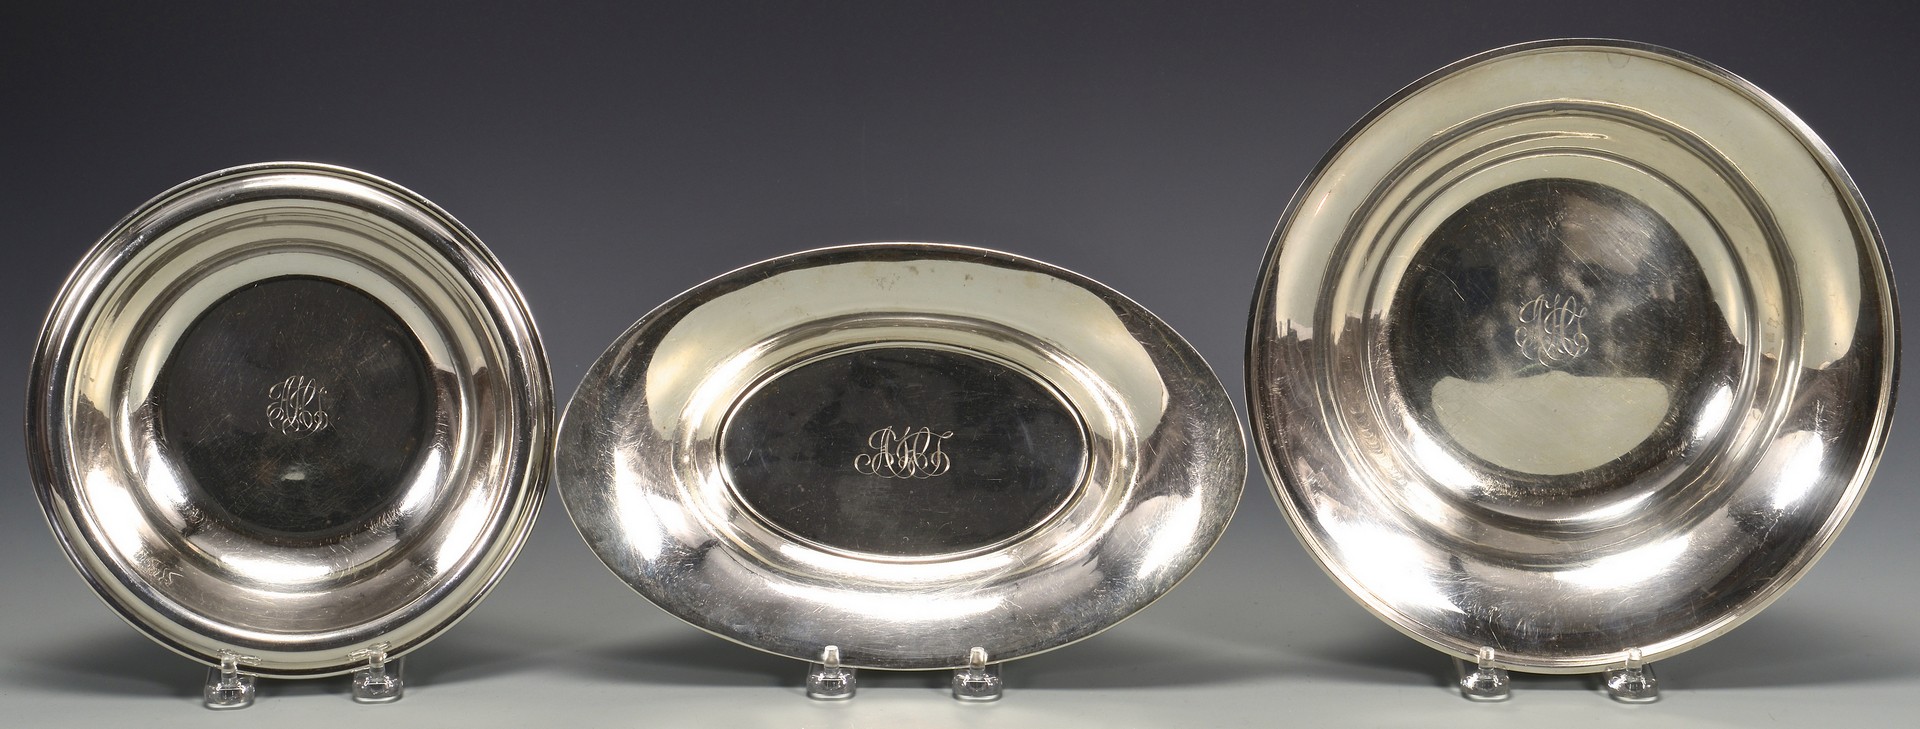 Lot 571: 5 Sterling Silver Bowls/Trays